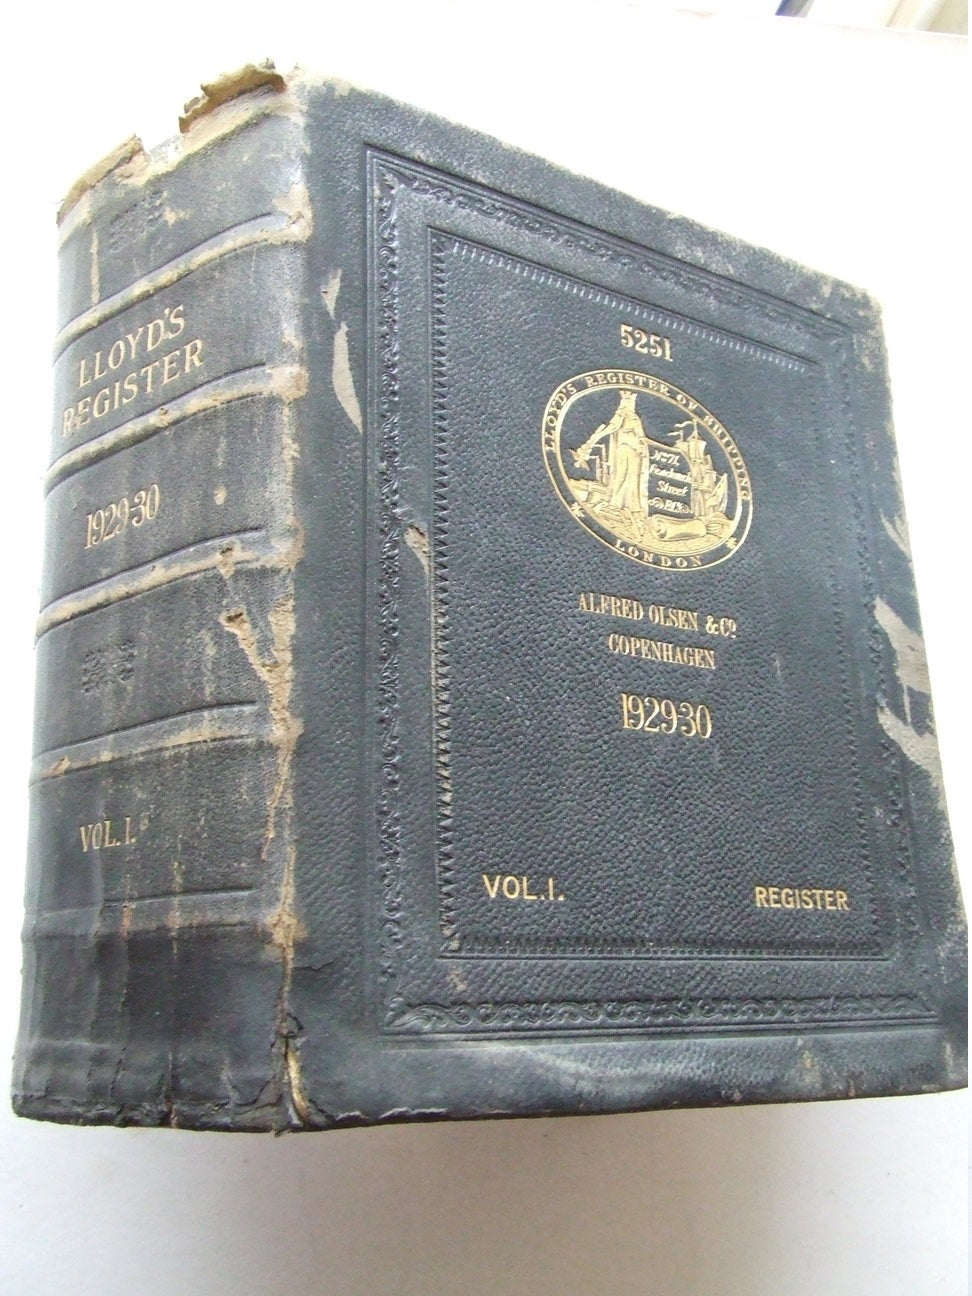 Lloyd's Register of Shipping....from 1st July 1929 to 30th June 1930